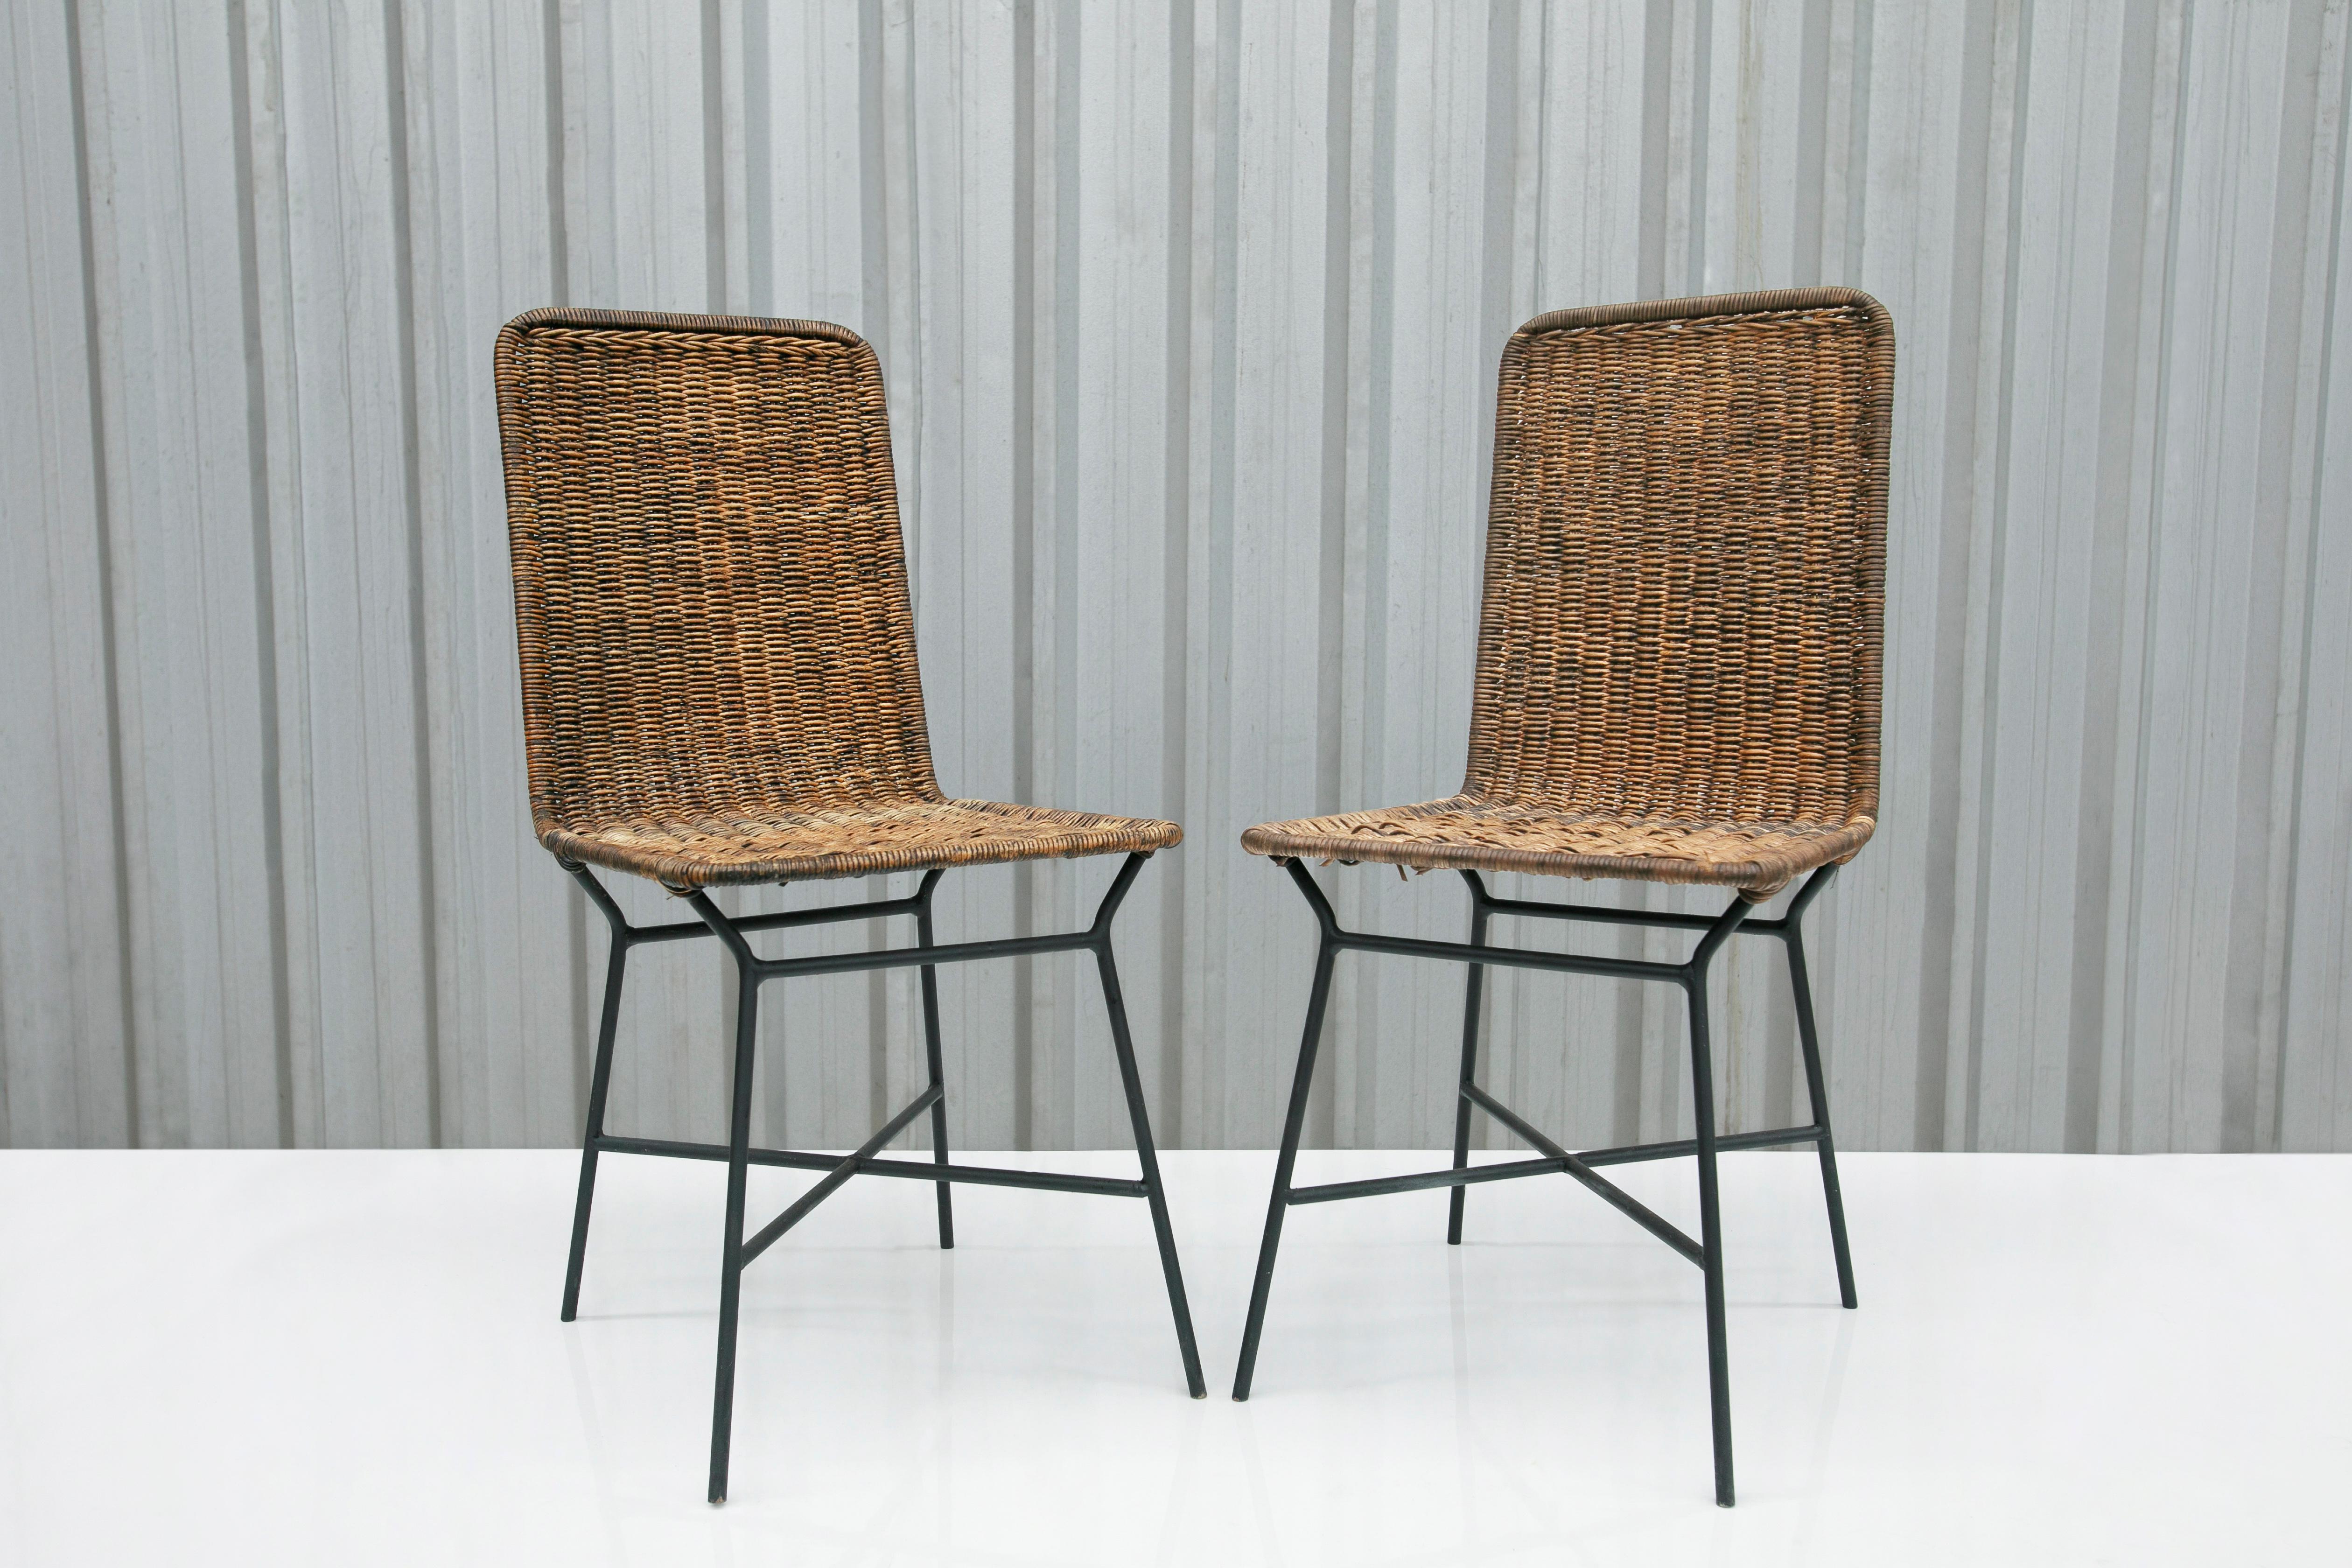 Brazilian Modern Chairs in Caning and Metal by Carlo Hauner, 1950s, Brazil For Sale 1